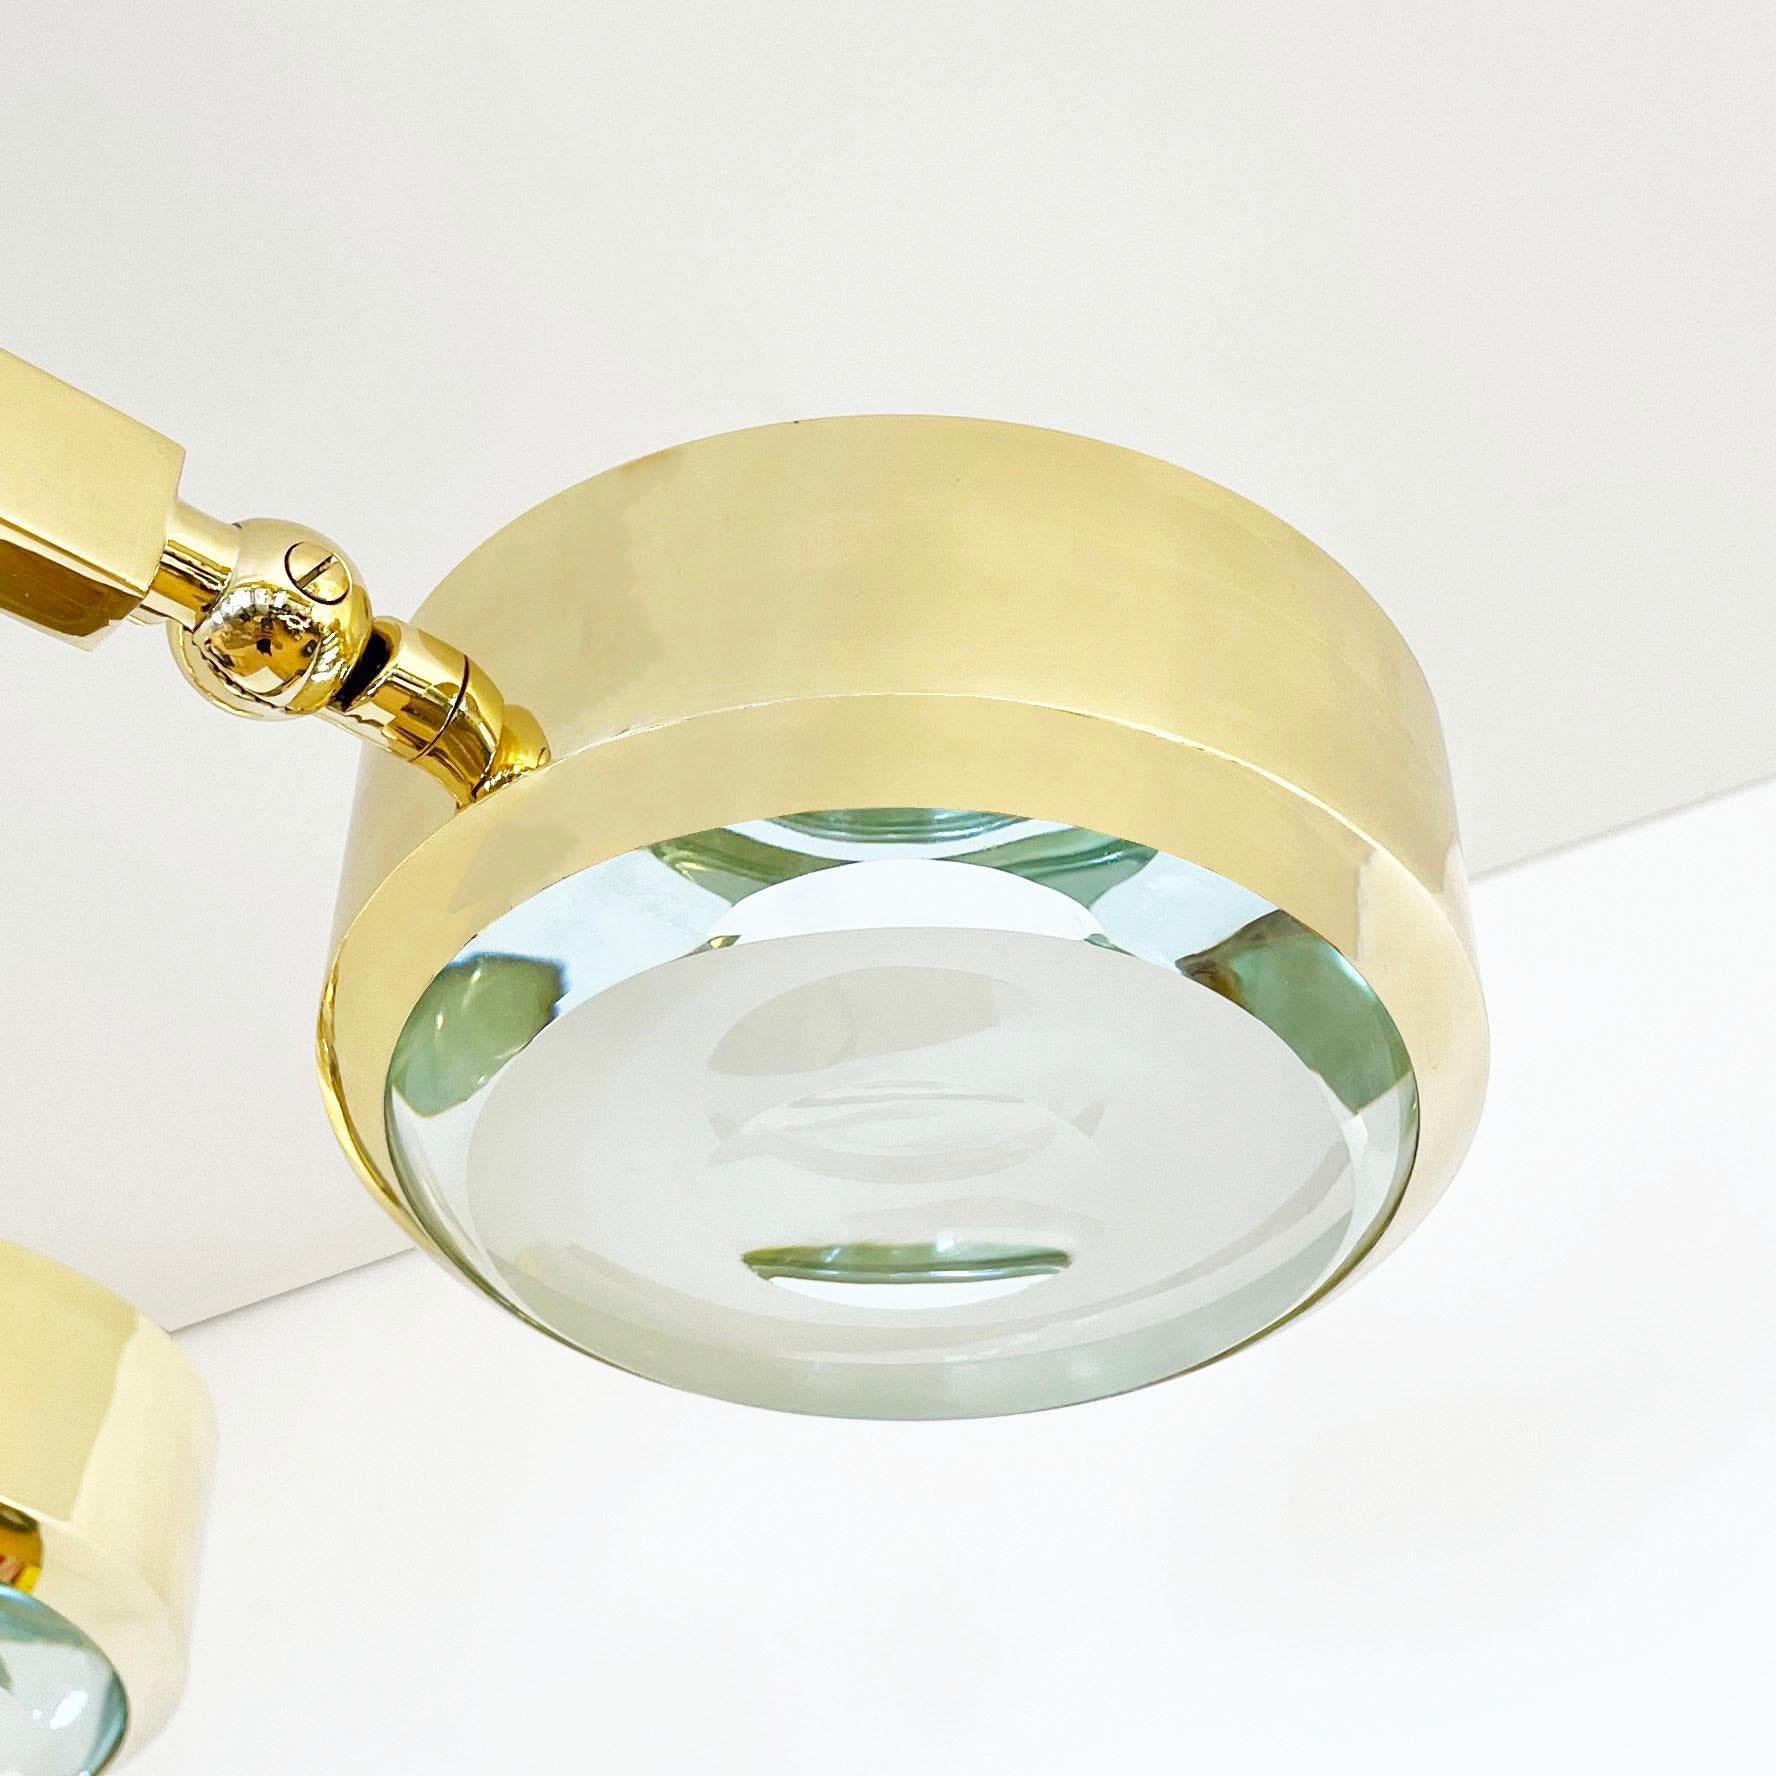 Oculus Oval Ceiling Light by Gaspare Asaro- Polished Brass with Carved Glass For Sale 4